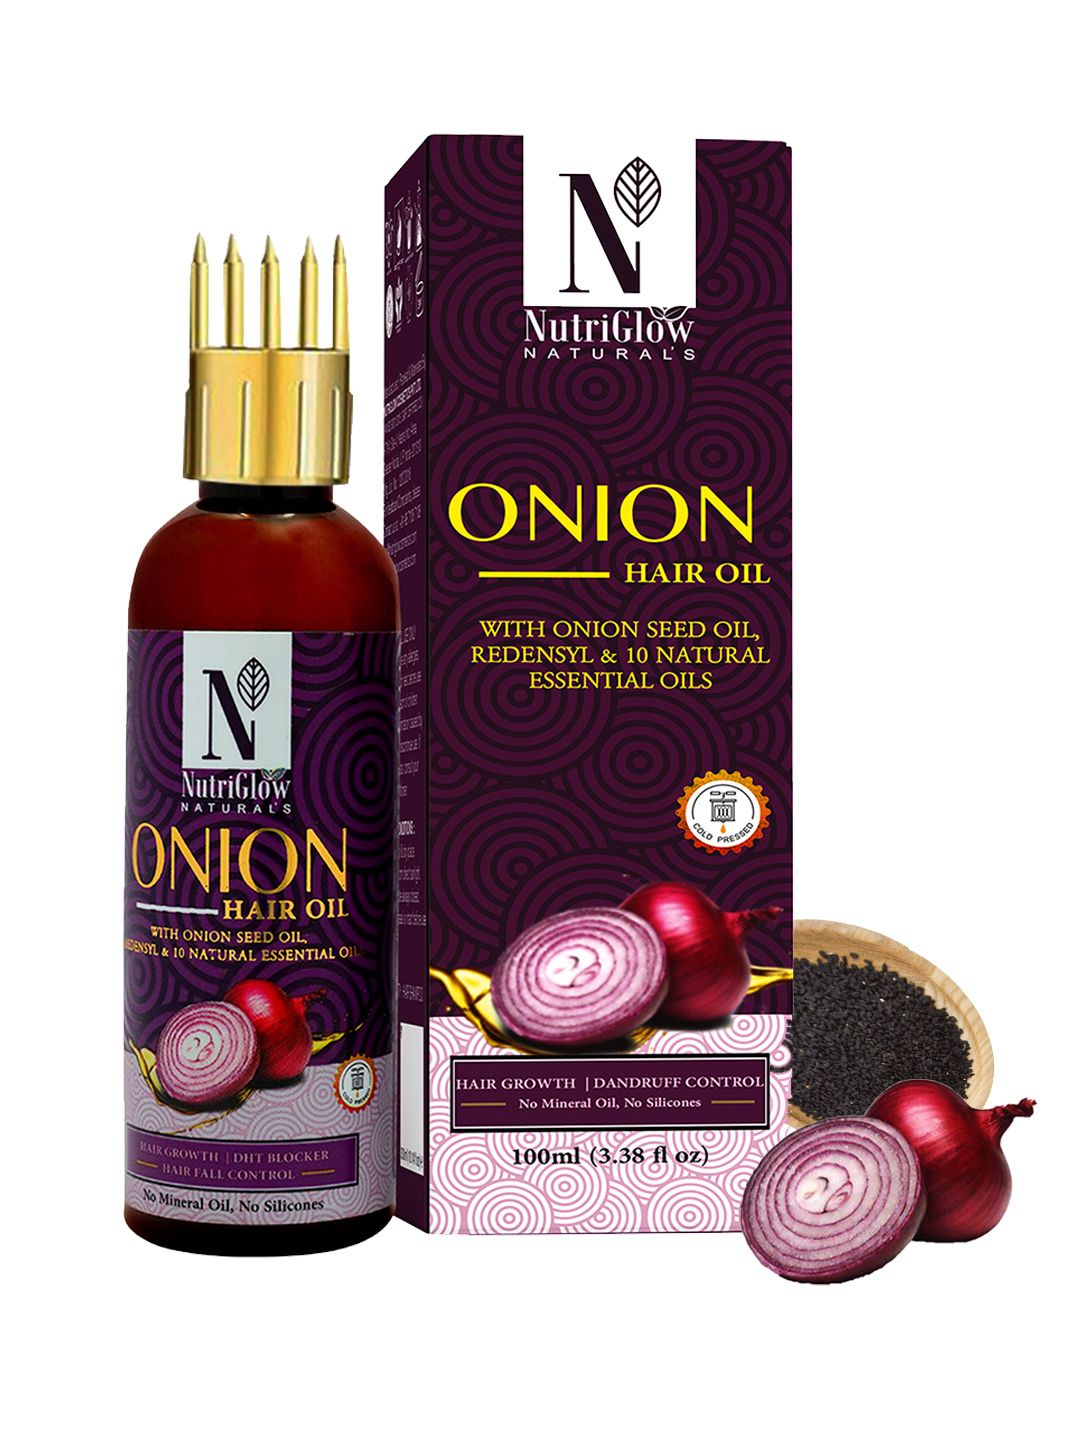 NutriGlow Naturals Onion Hair Oil with Redensyl for Hair Growth & Dandruff Control - 100ml Price in India